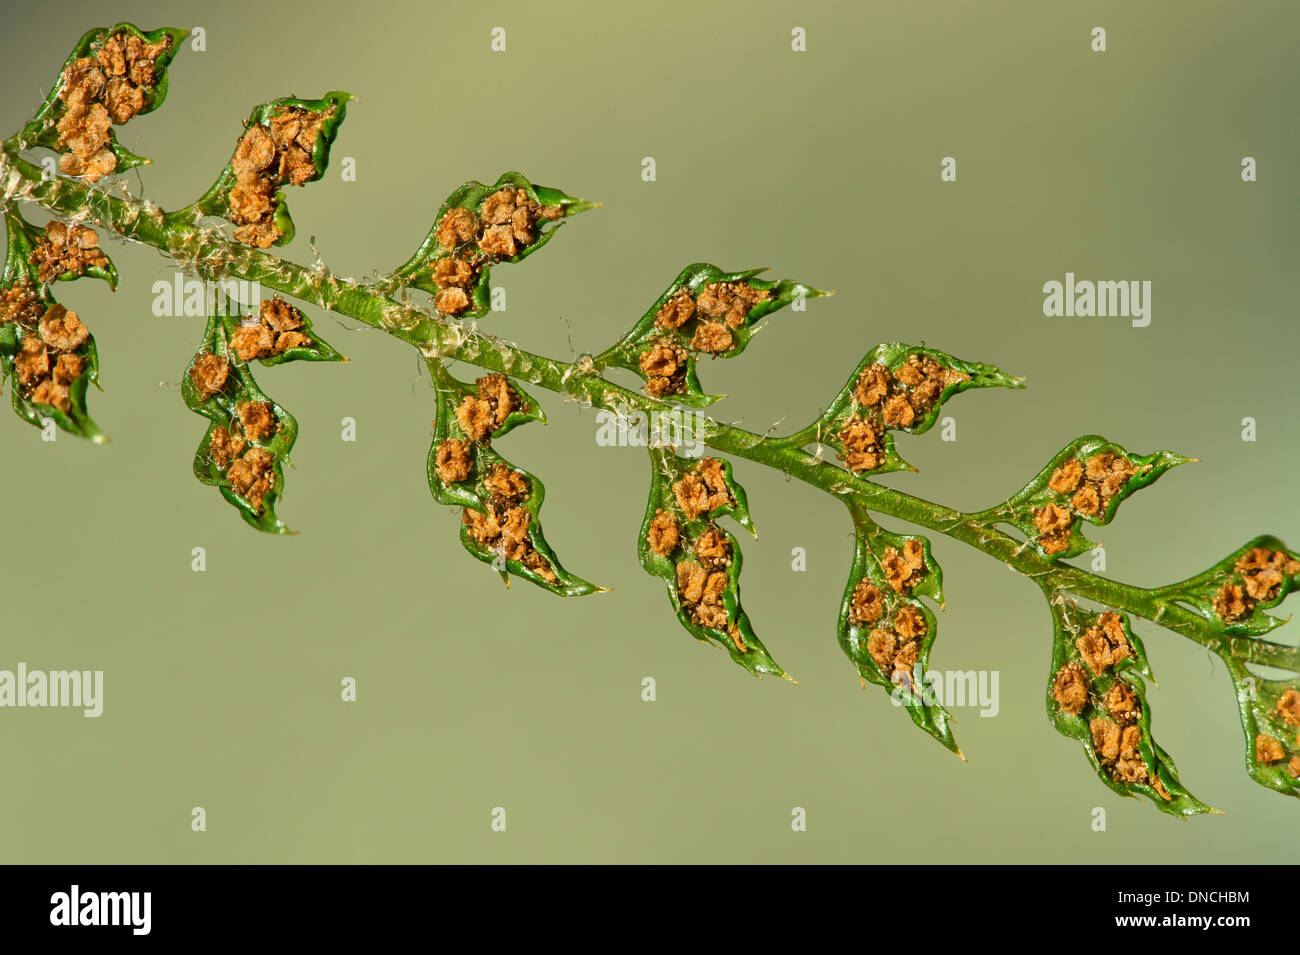 Ripe sori at the underside of a the Soft shield fern (Polystichum setiferum), Dryopteridaceae family Stock Photo